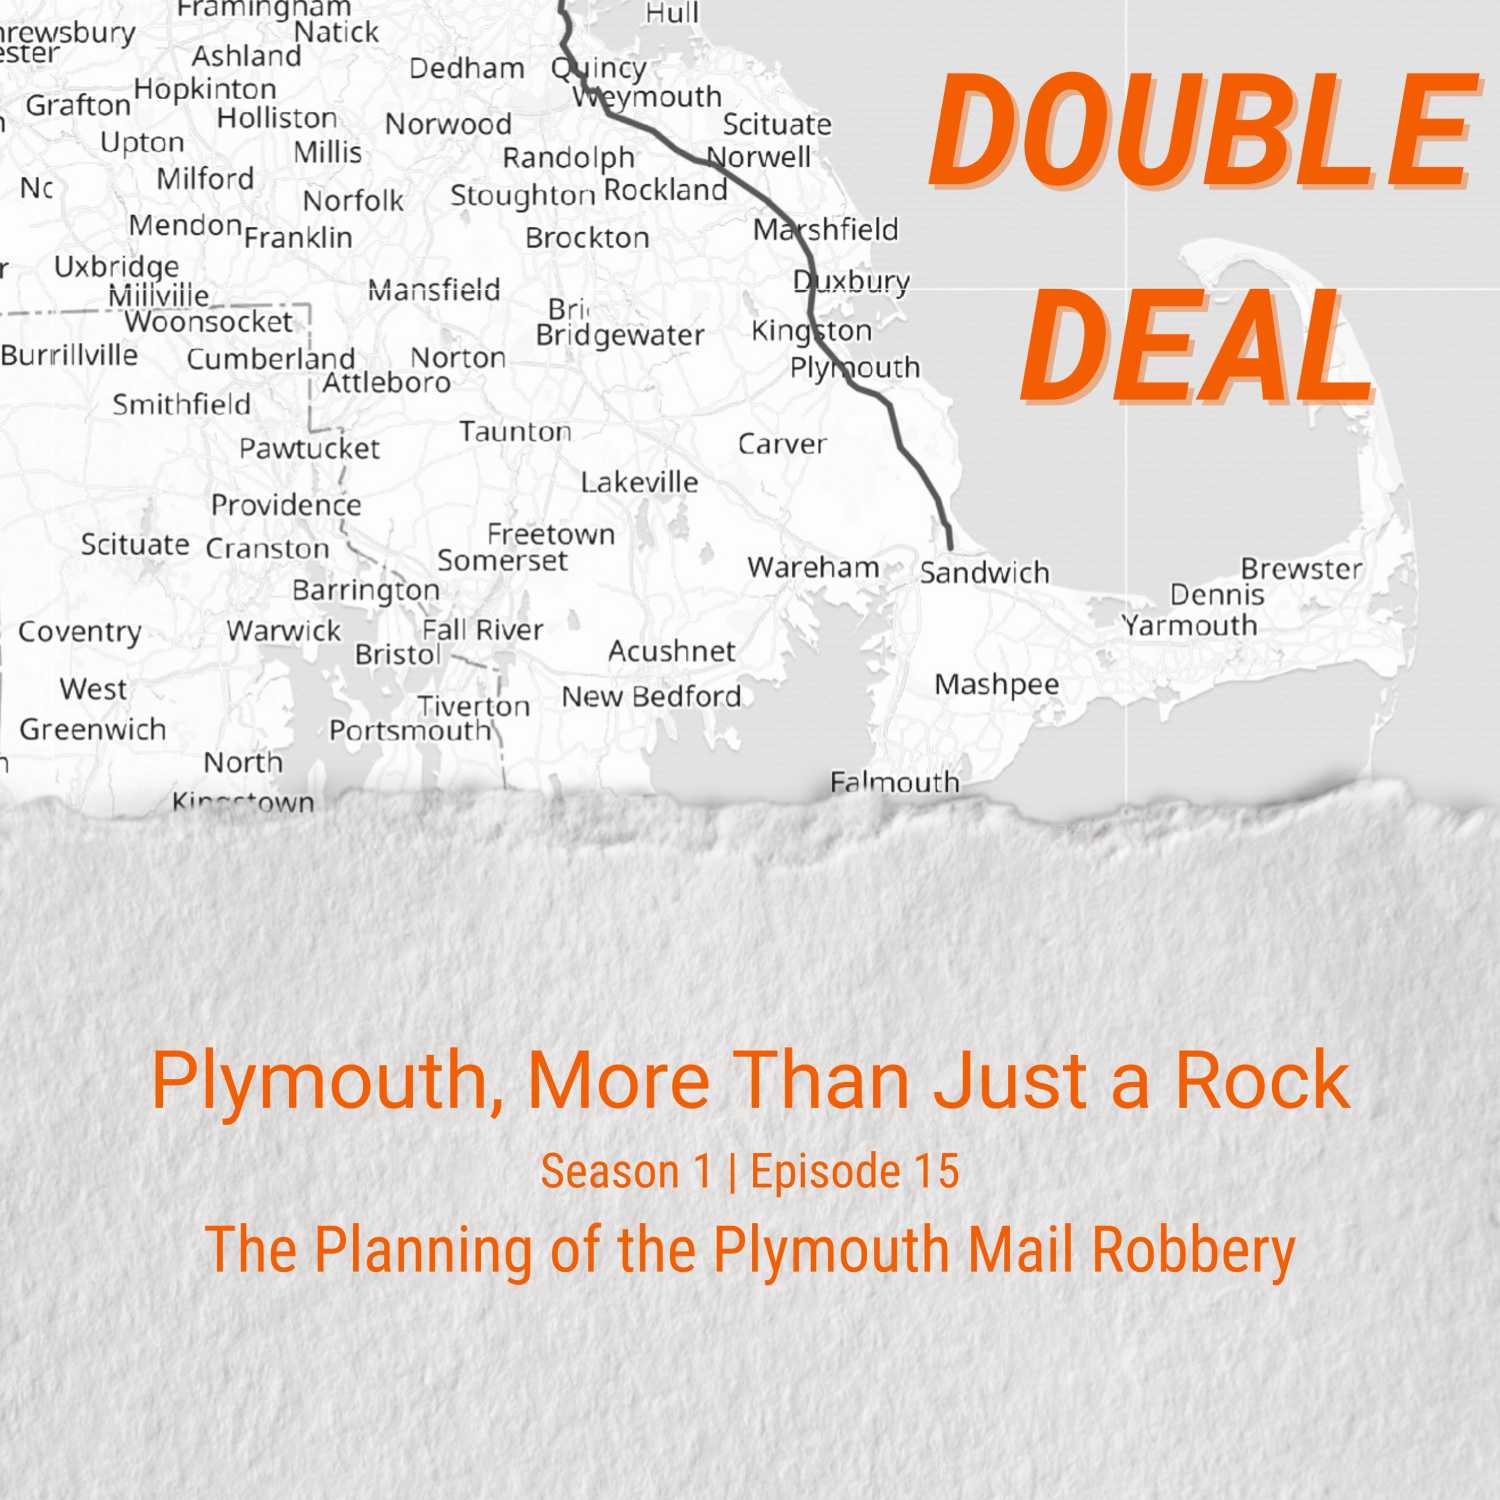 Plymouth, More Than Just a Rock - The Planning of the Plymouth Mail Robbery